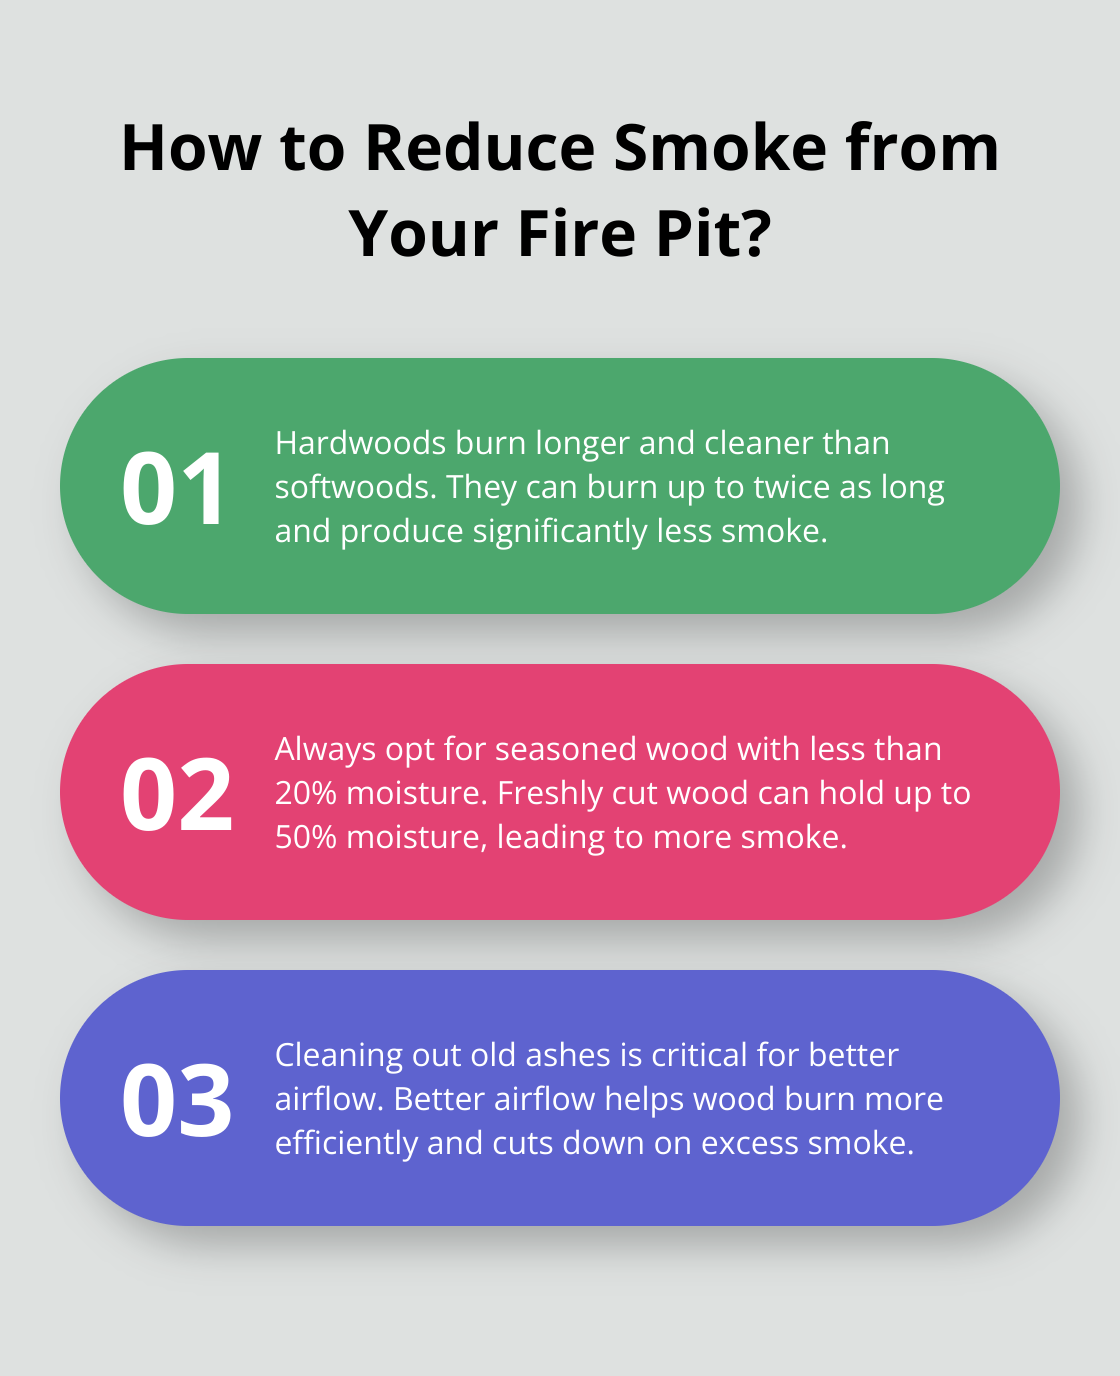 Fact - How to Reduce Smoke from Your Fire Pit?